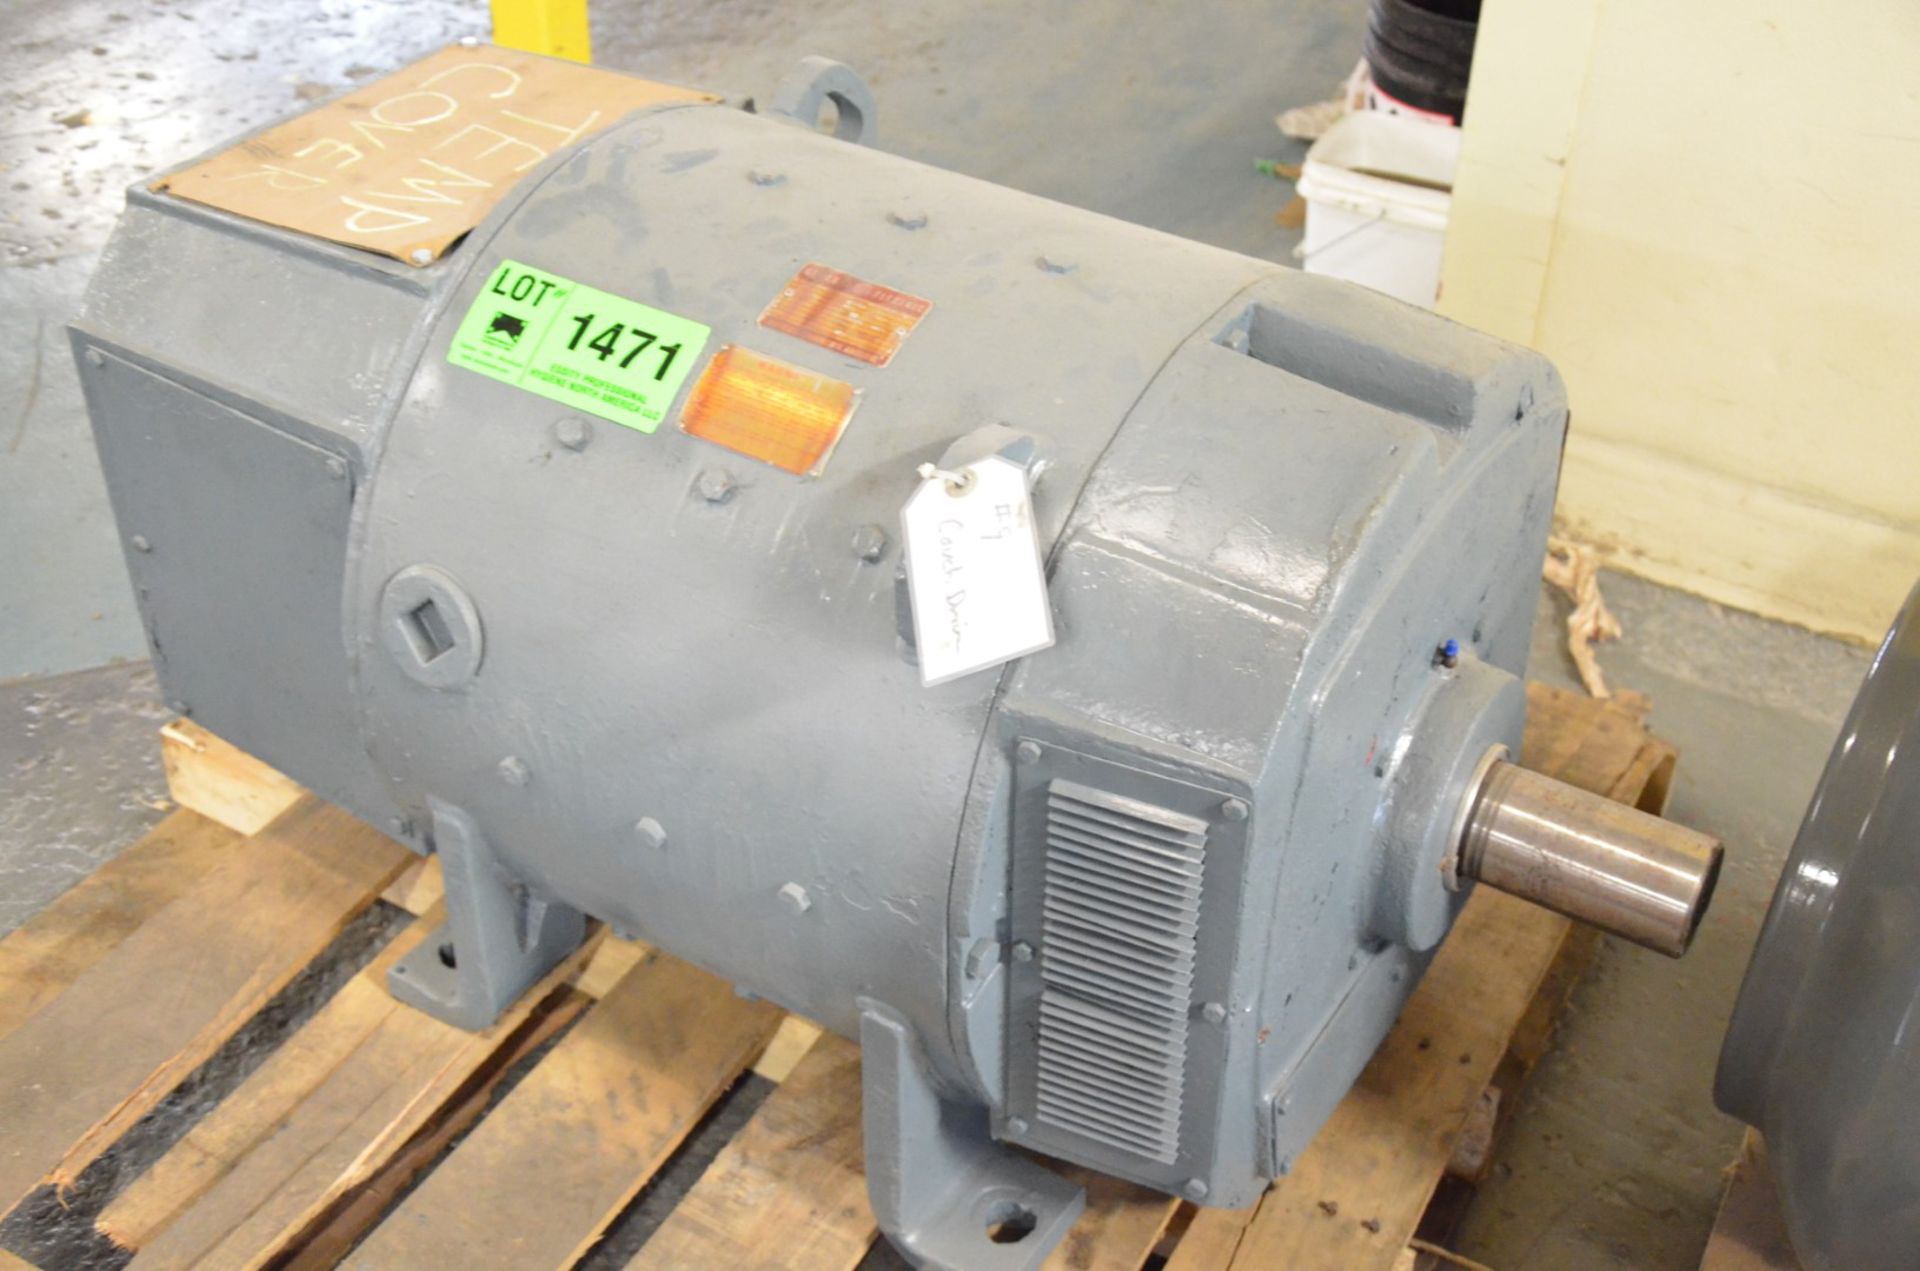 GE 150 HP 2000 RPM 460V ELECTRIC MOTOR [RIGGING FEE FOR LOT #1471 - $50 USD PLUS APPLICABLE TAXES]